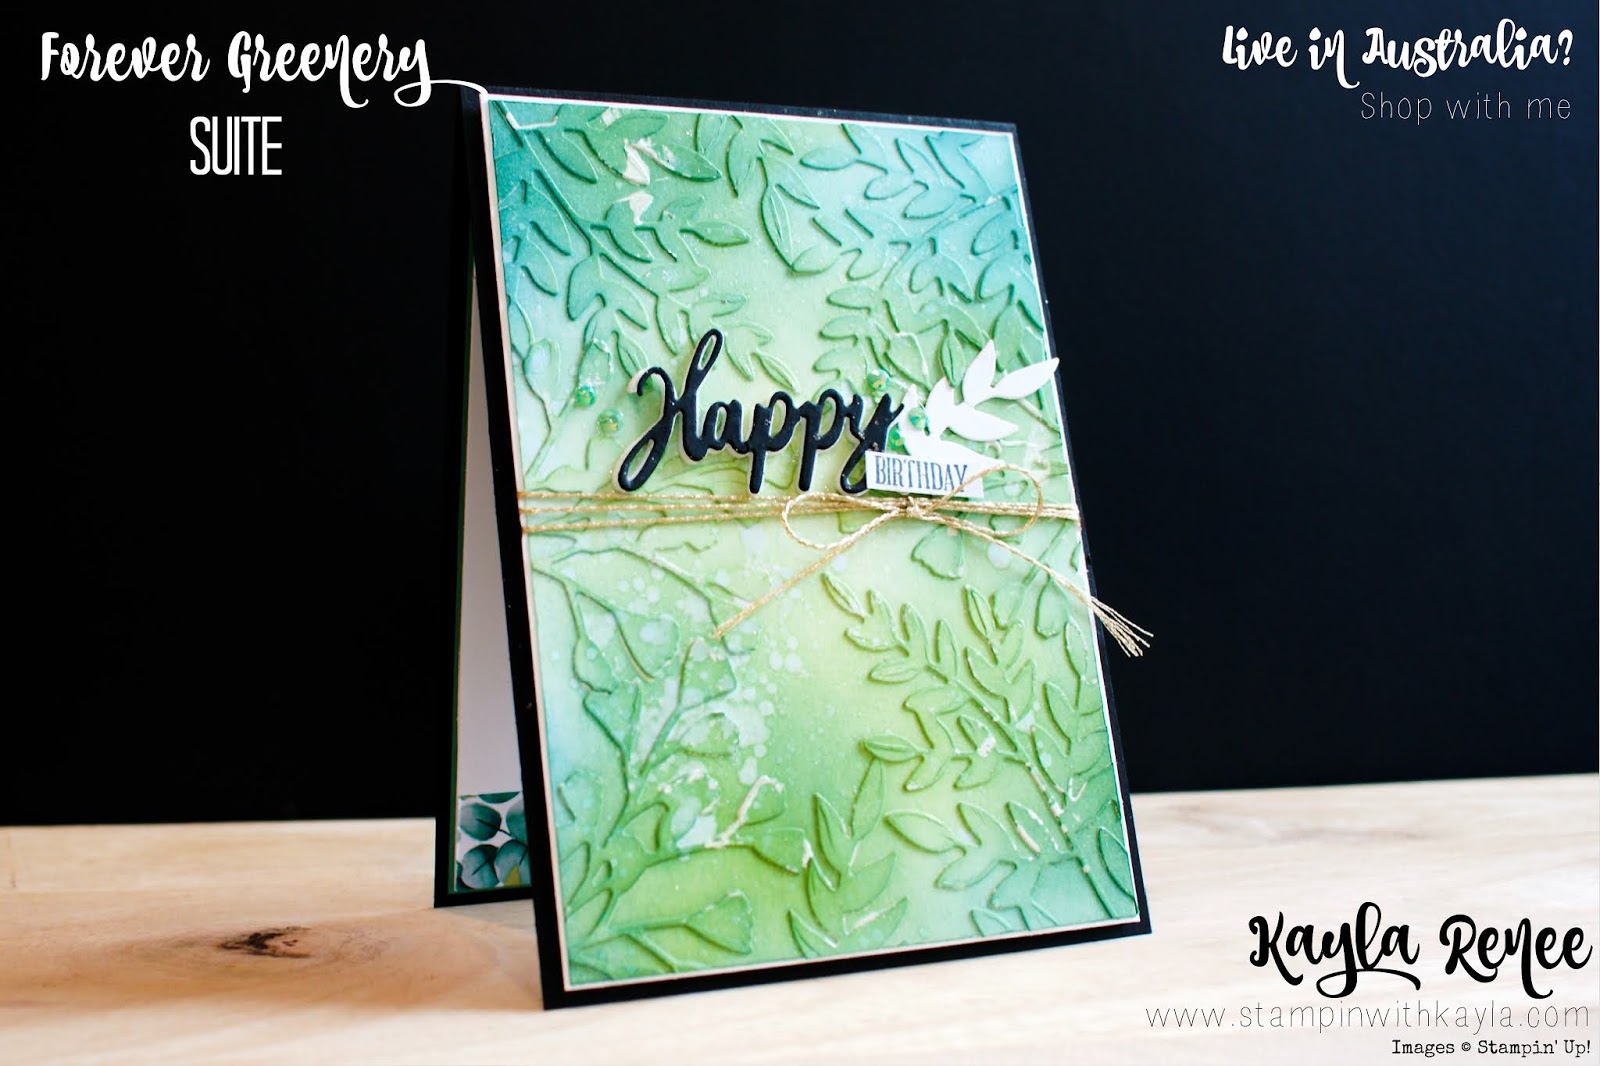 Stampin’ Up! Forever Greenery ~ Happy Birthday Card